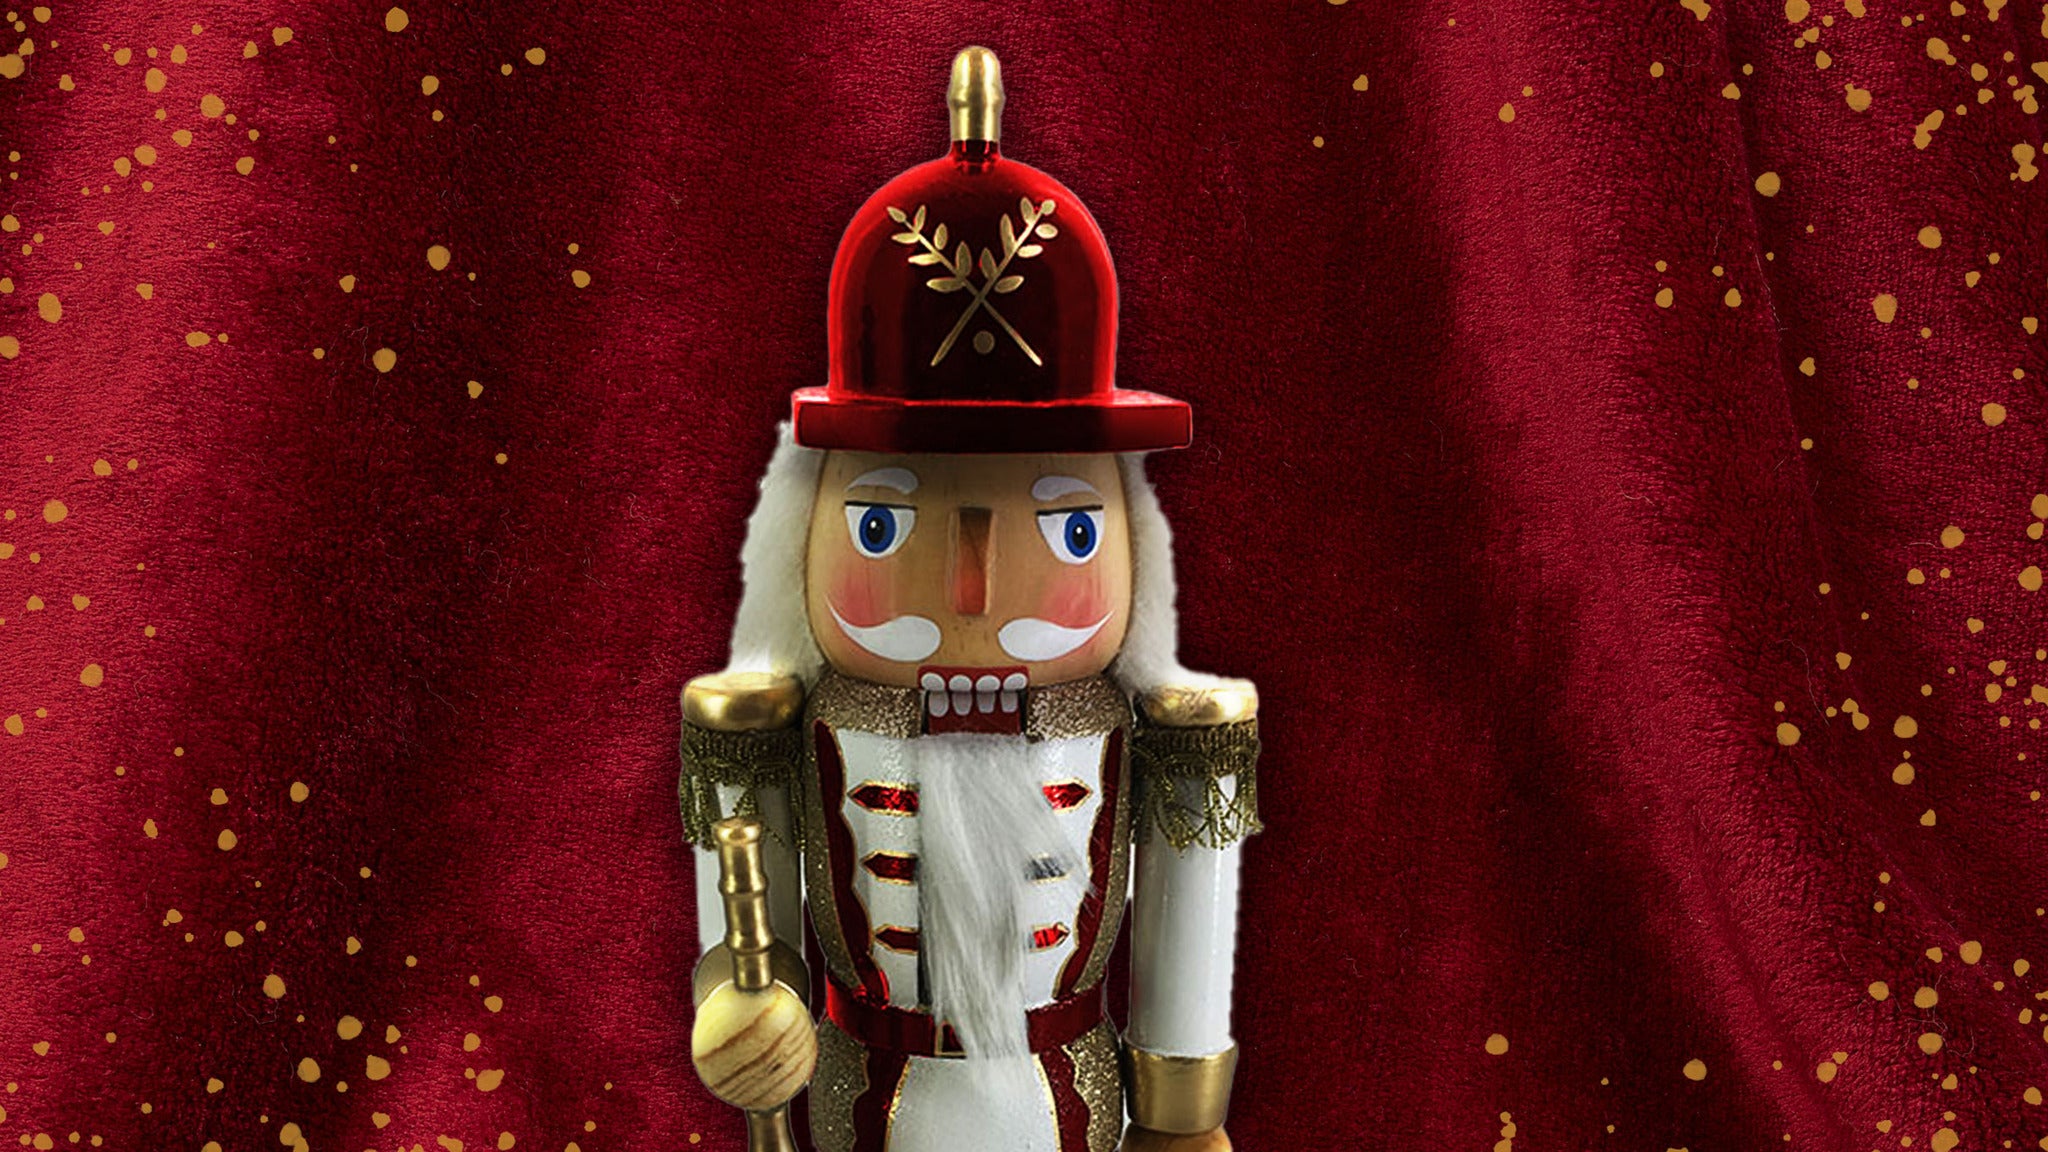 Official Wooden Nutcracker Upsell in Durham promo photo for Exclusive presale offer code